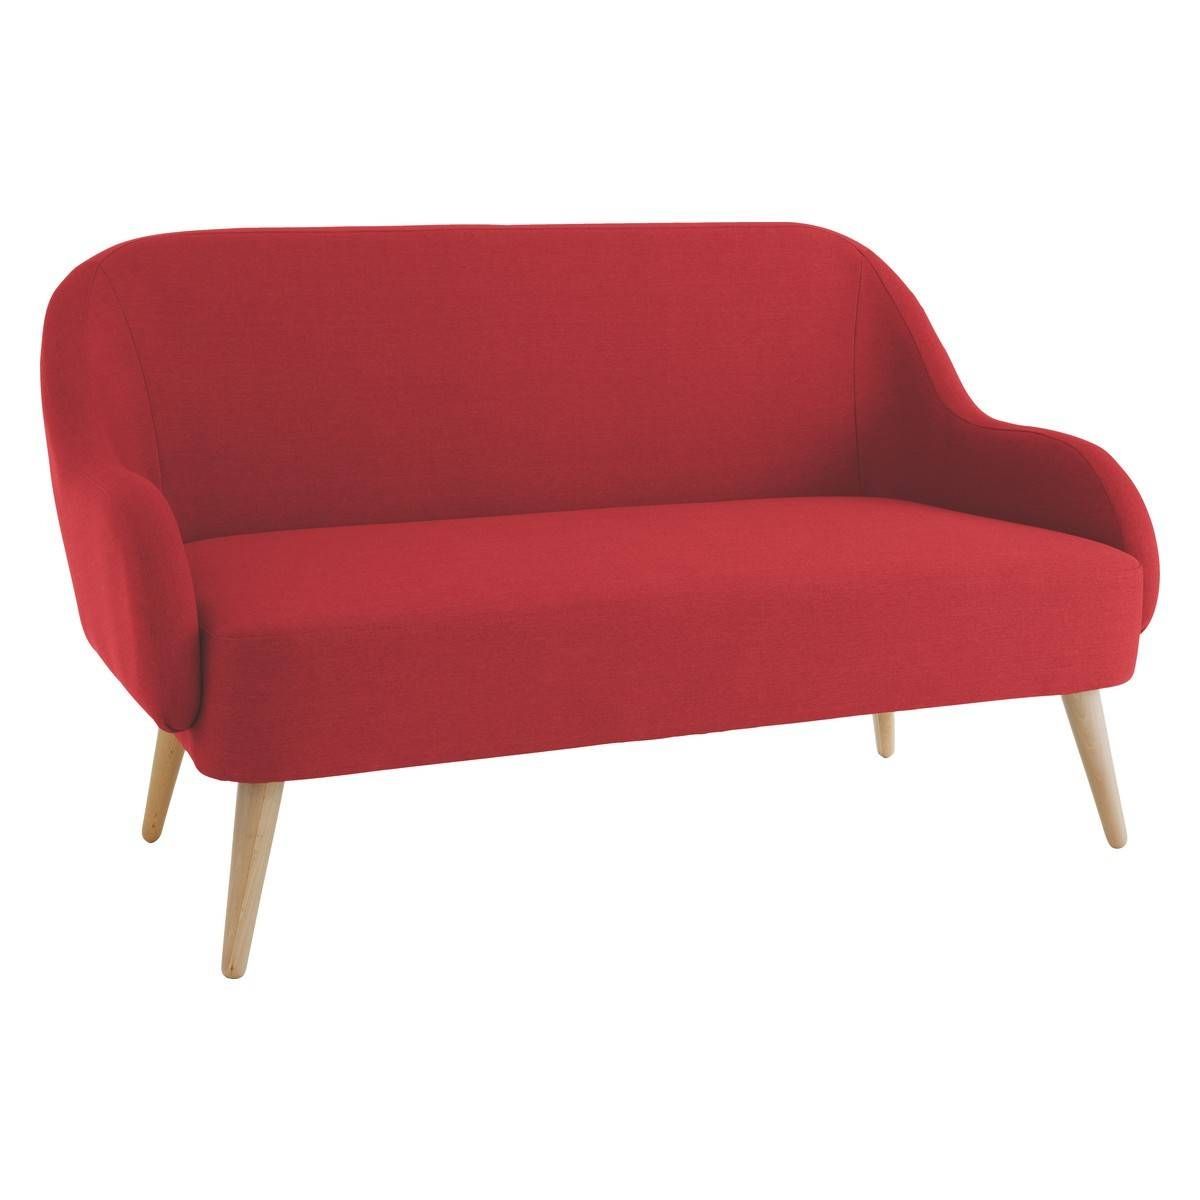 Momo Red Fabric 2 Seater Sofa | Buy Now At Habitat Uk For Two Seater Chairs (View 13 of 30)